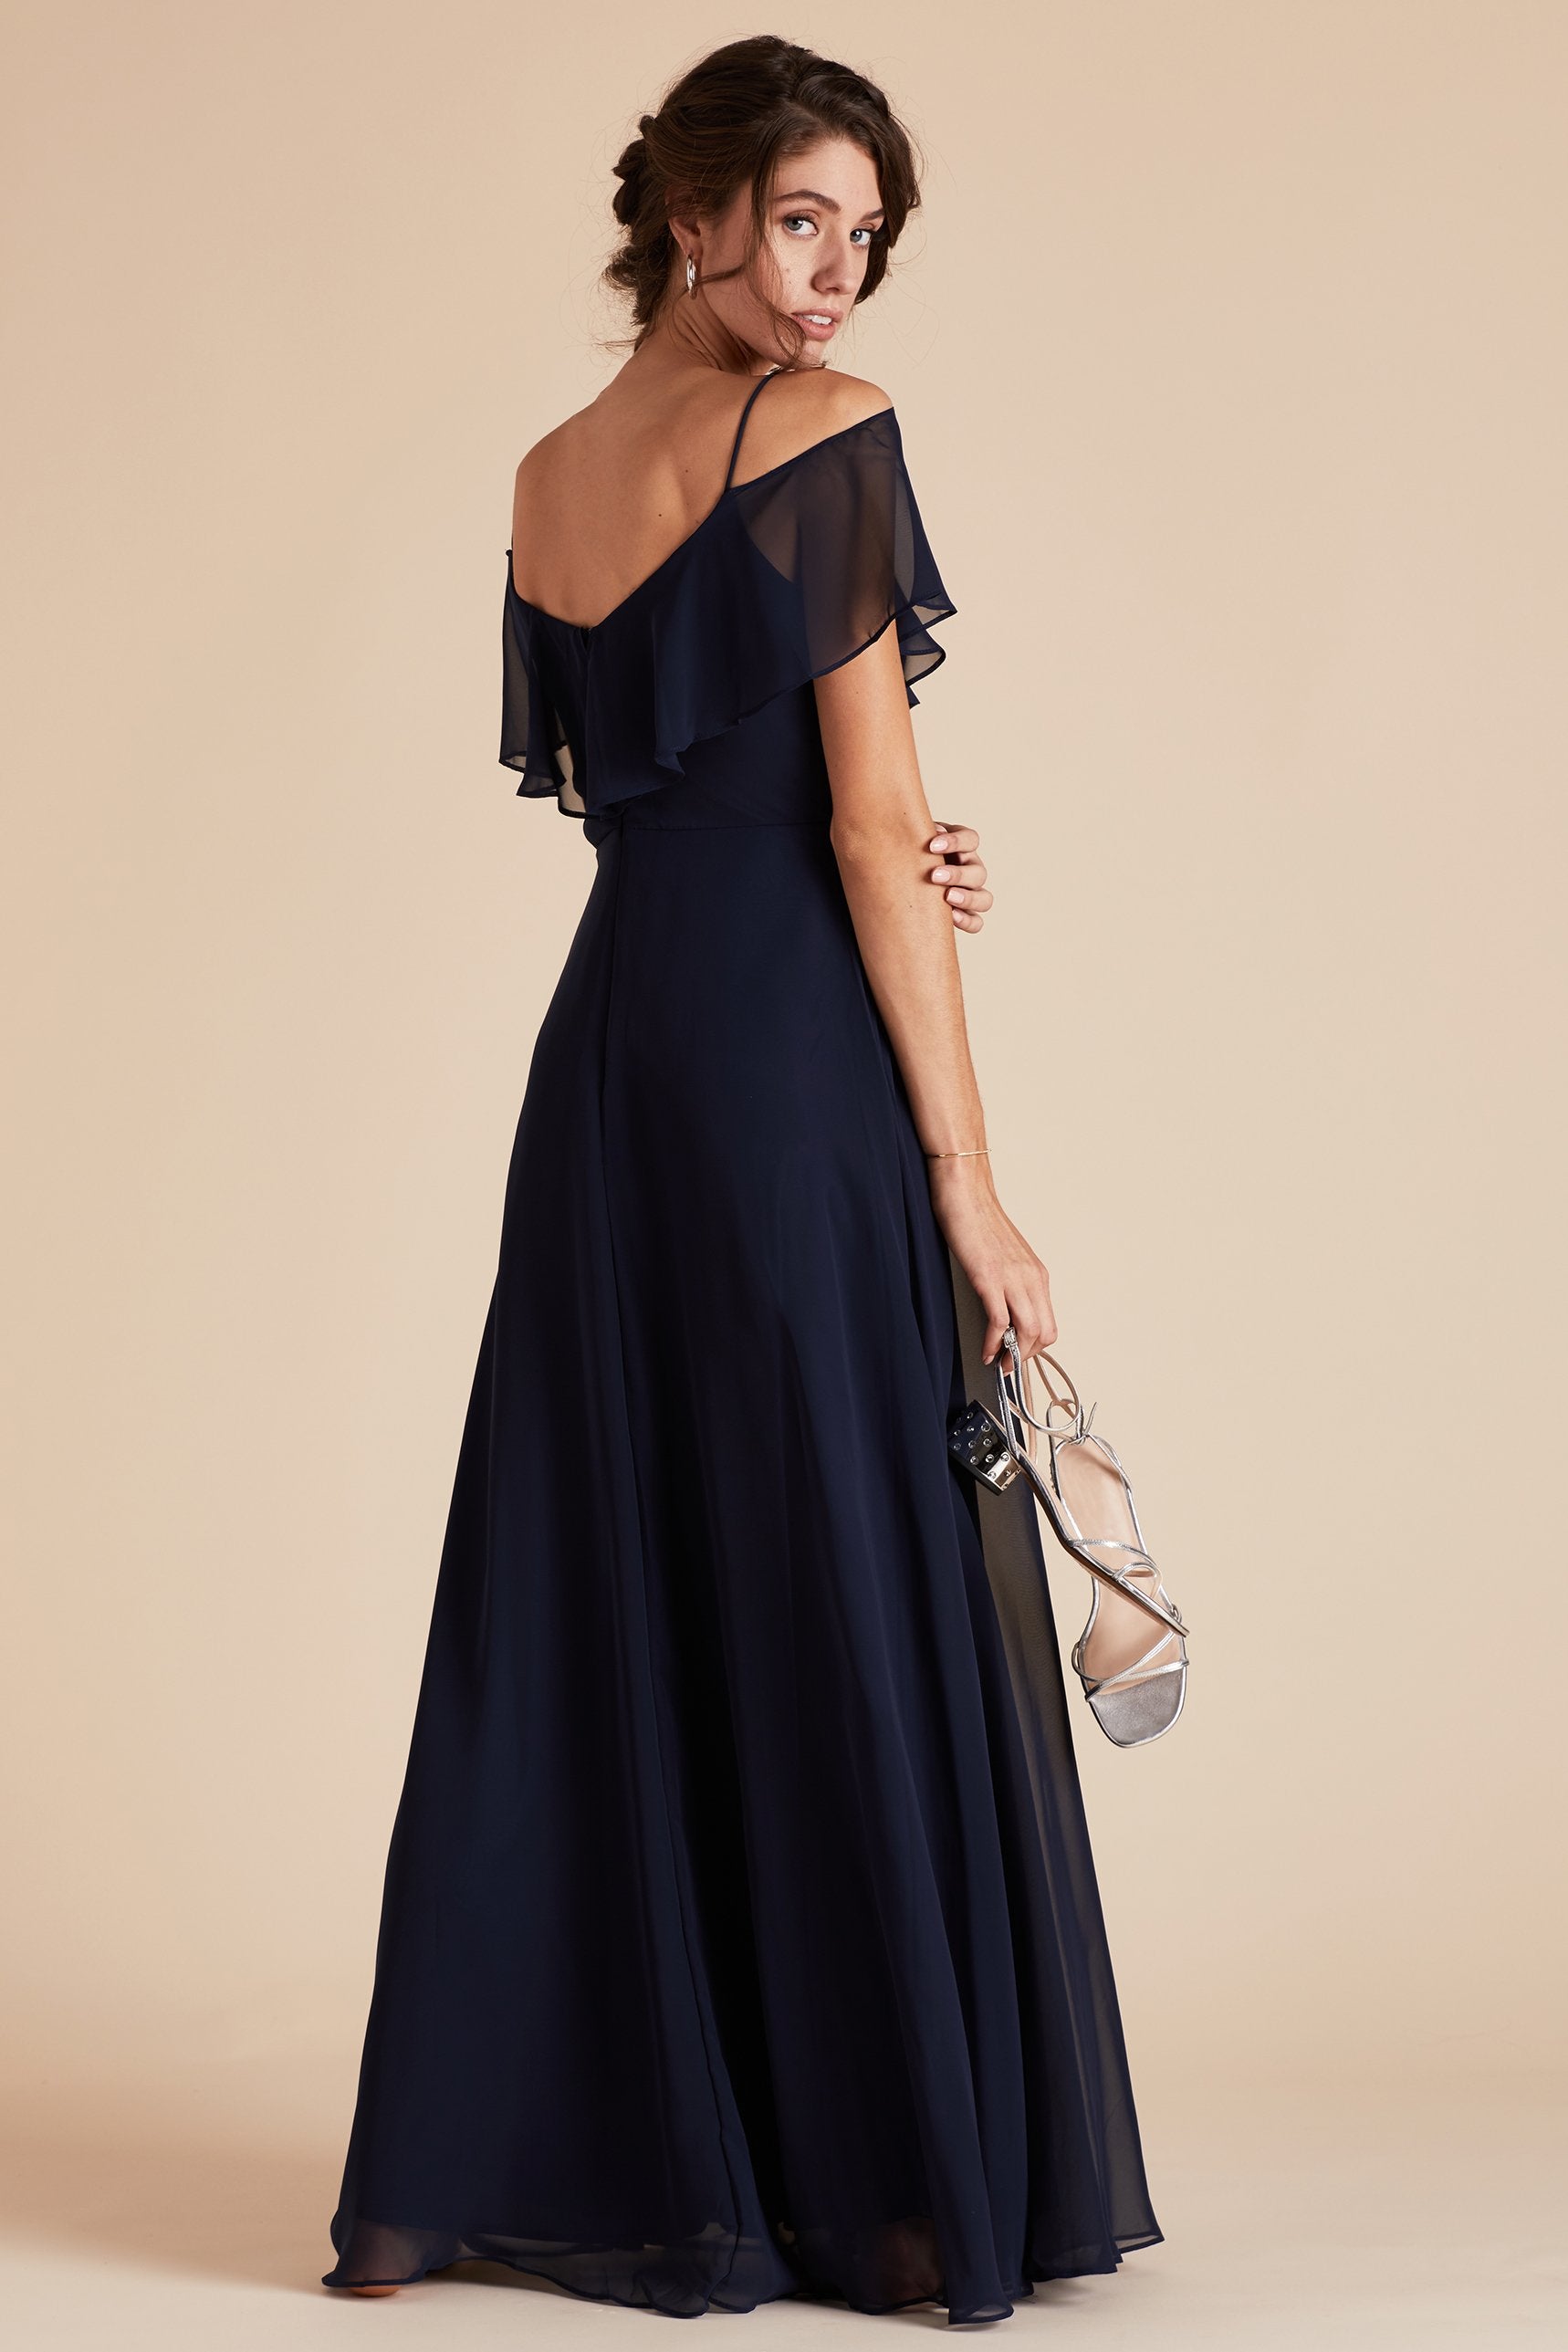 Jane convertible bridesmaid dress in navy blue chiffon by Birdy Grey, side view